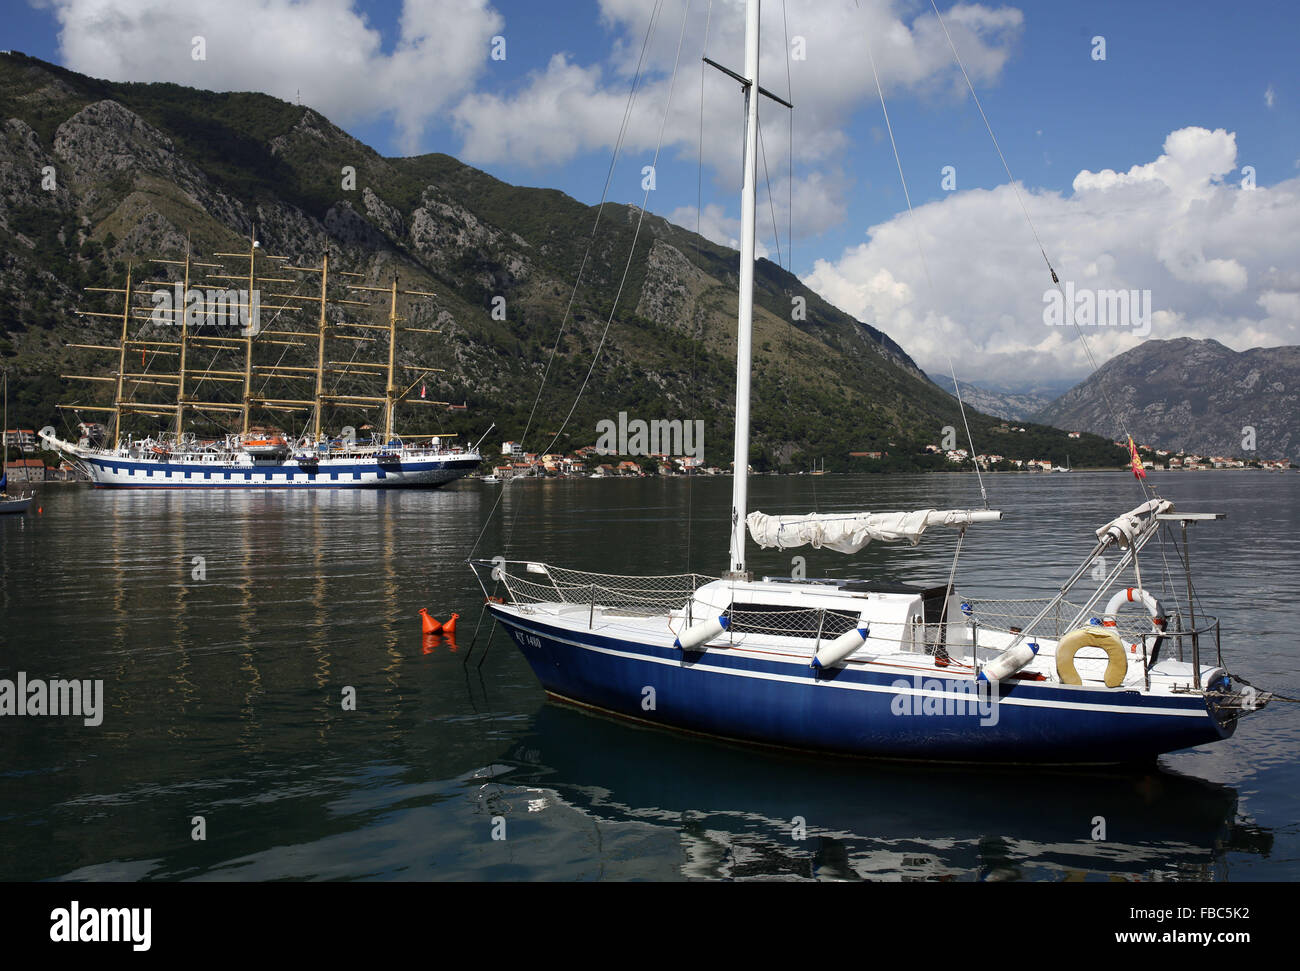 A tall ship pictured alongside a yacht in the Bay of Kotor near the medieval port town of Kotor in Montenegró Stock Photo